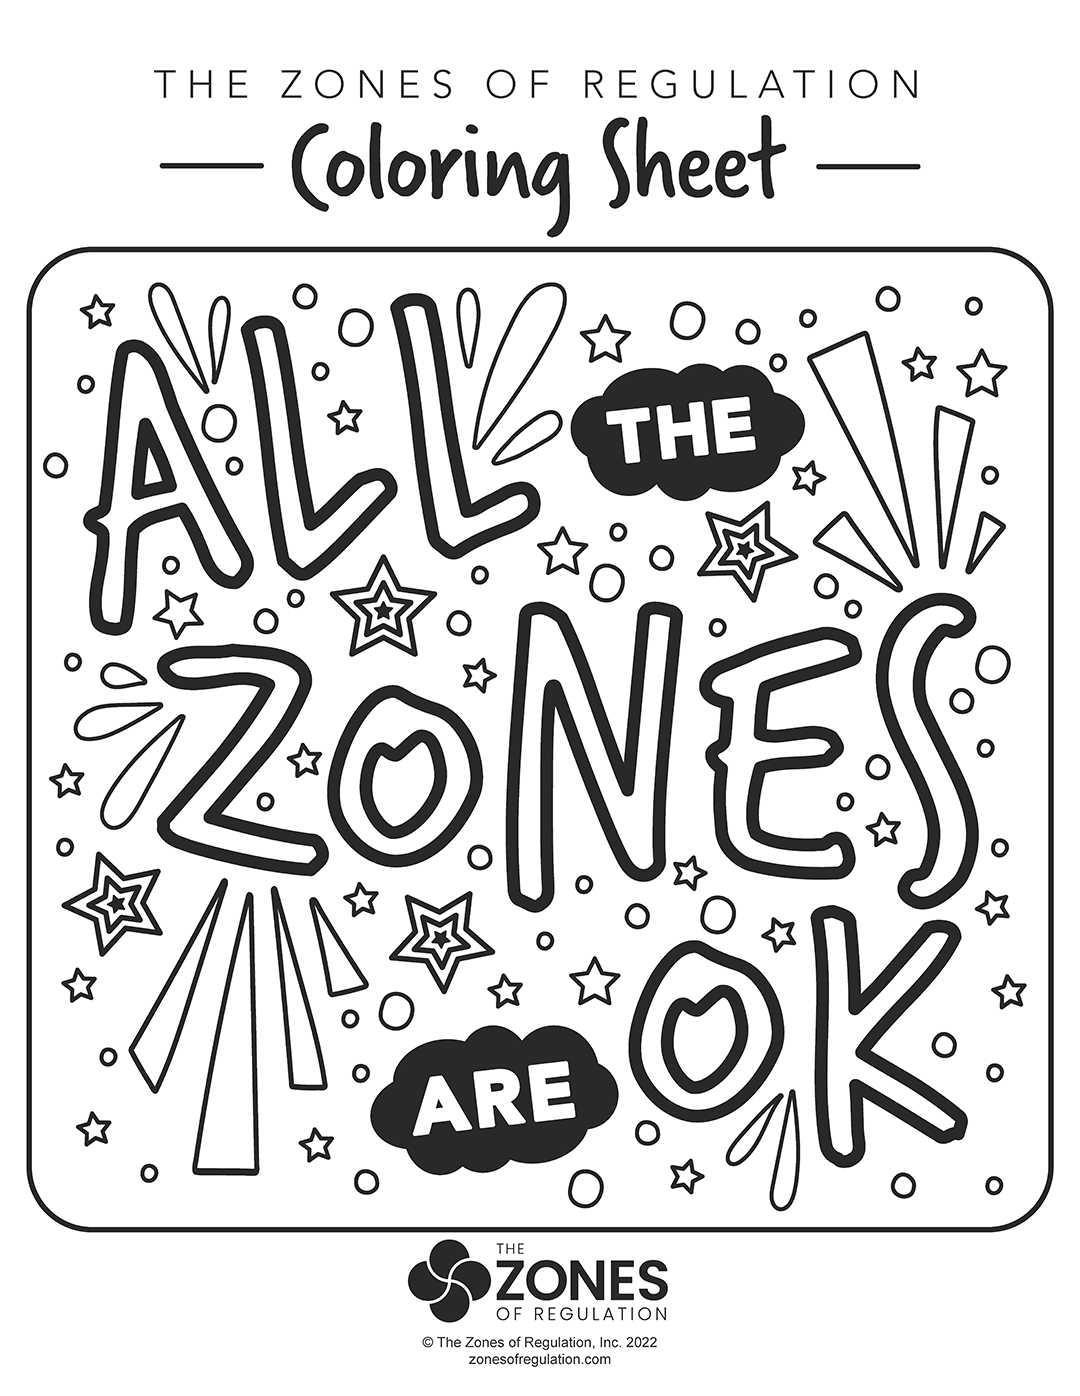 All the Zones are Ok coloring page